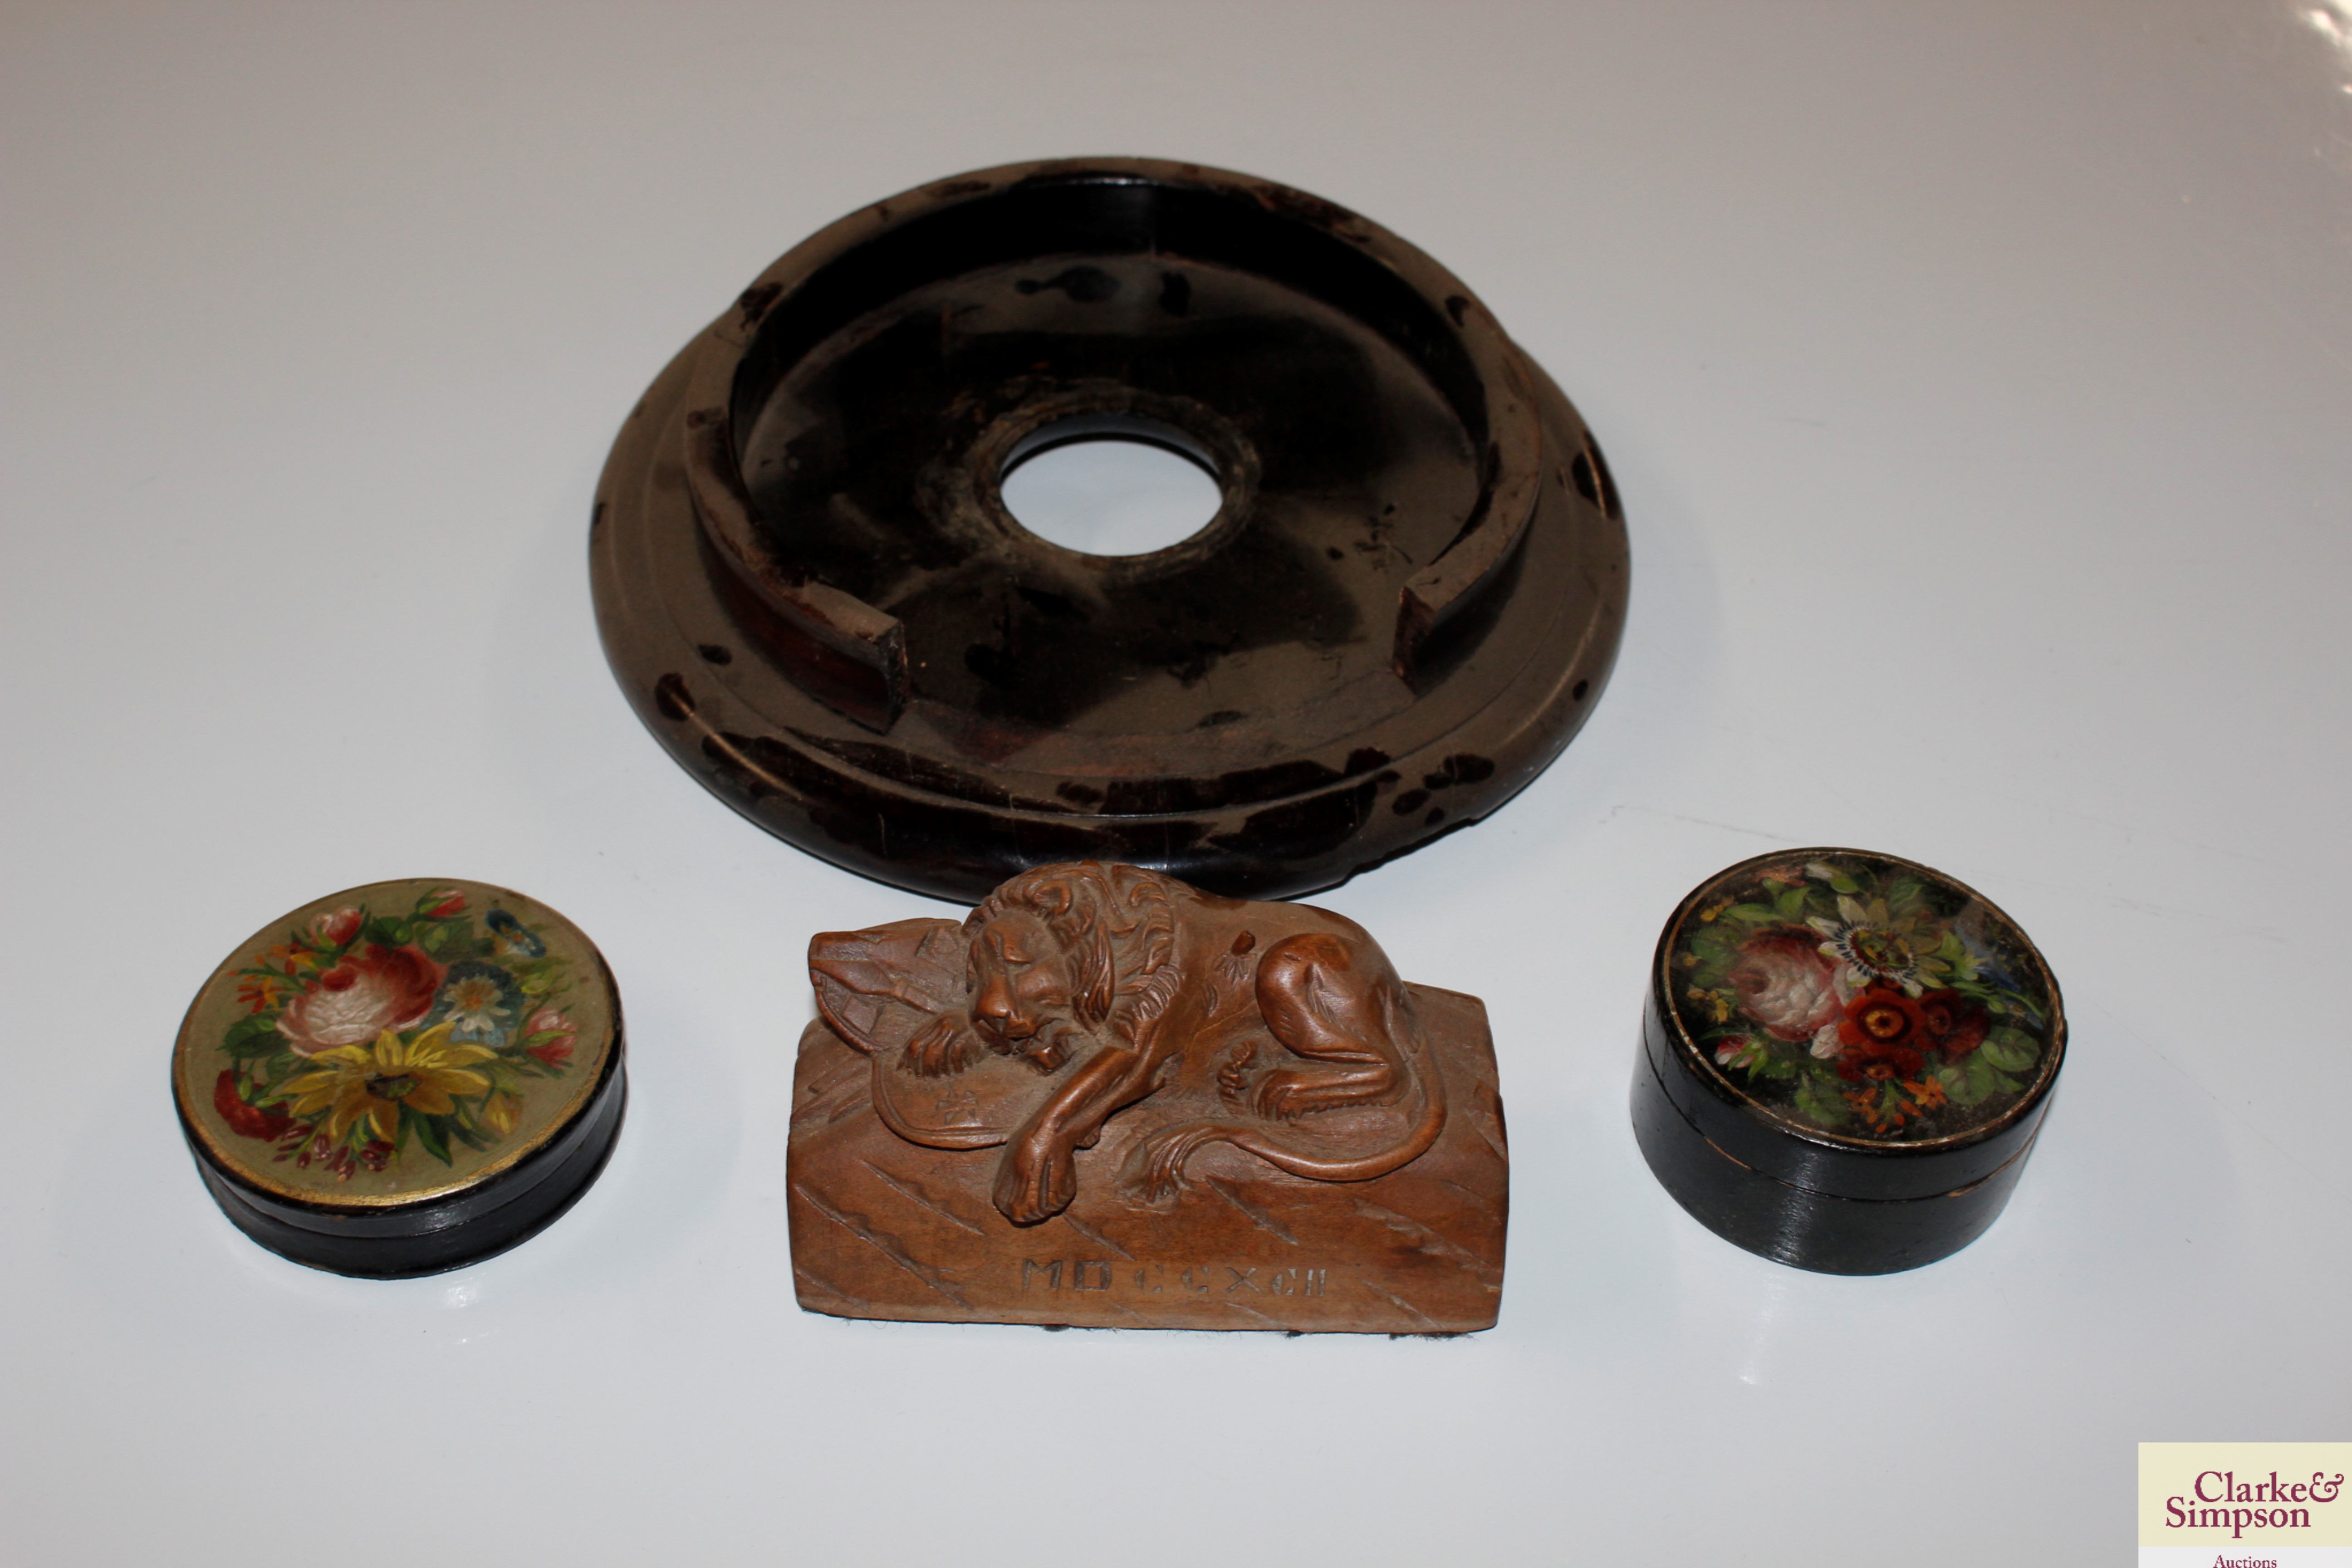 Two floral painted boxes and a carved wooden lion